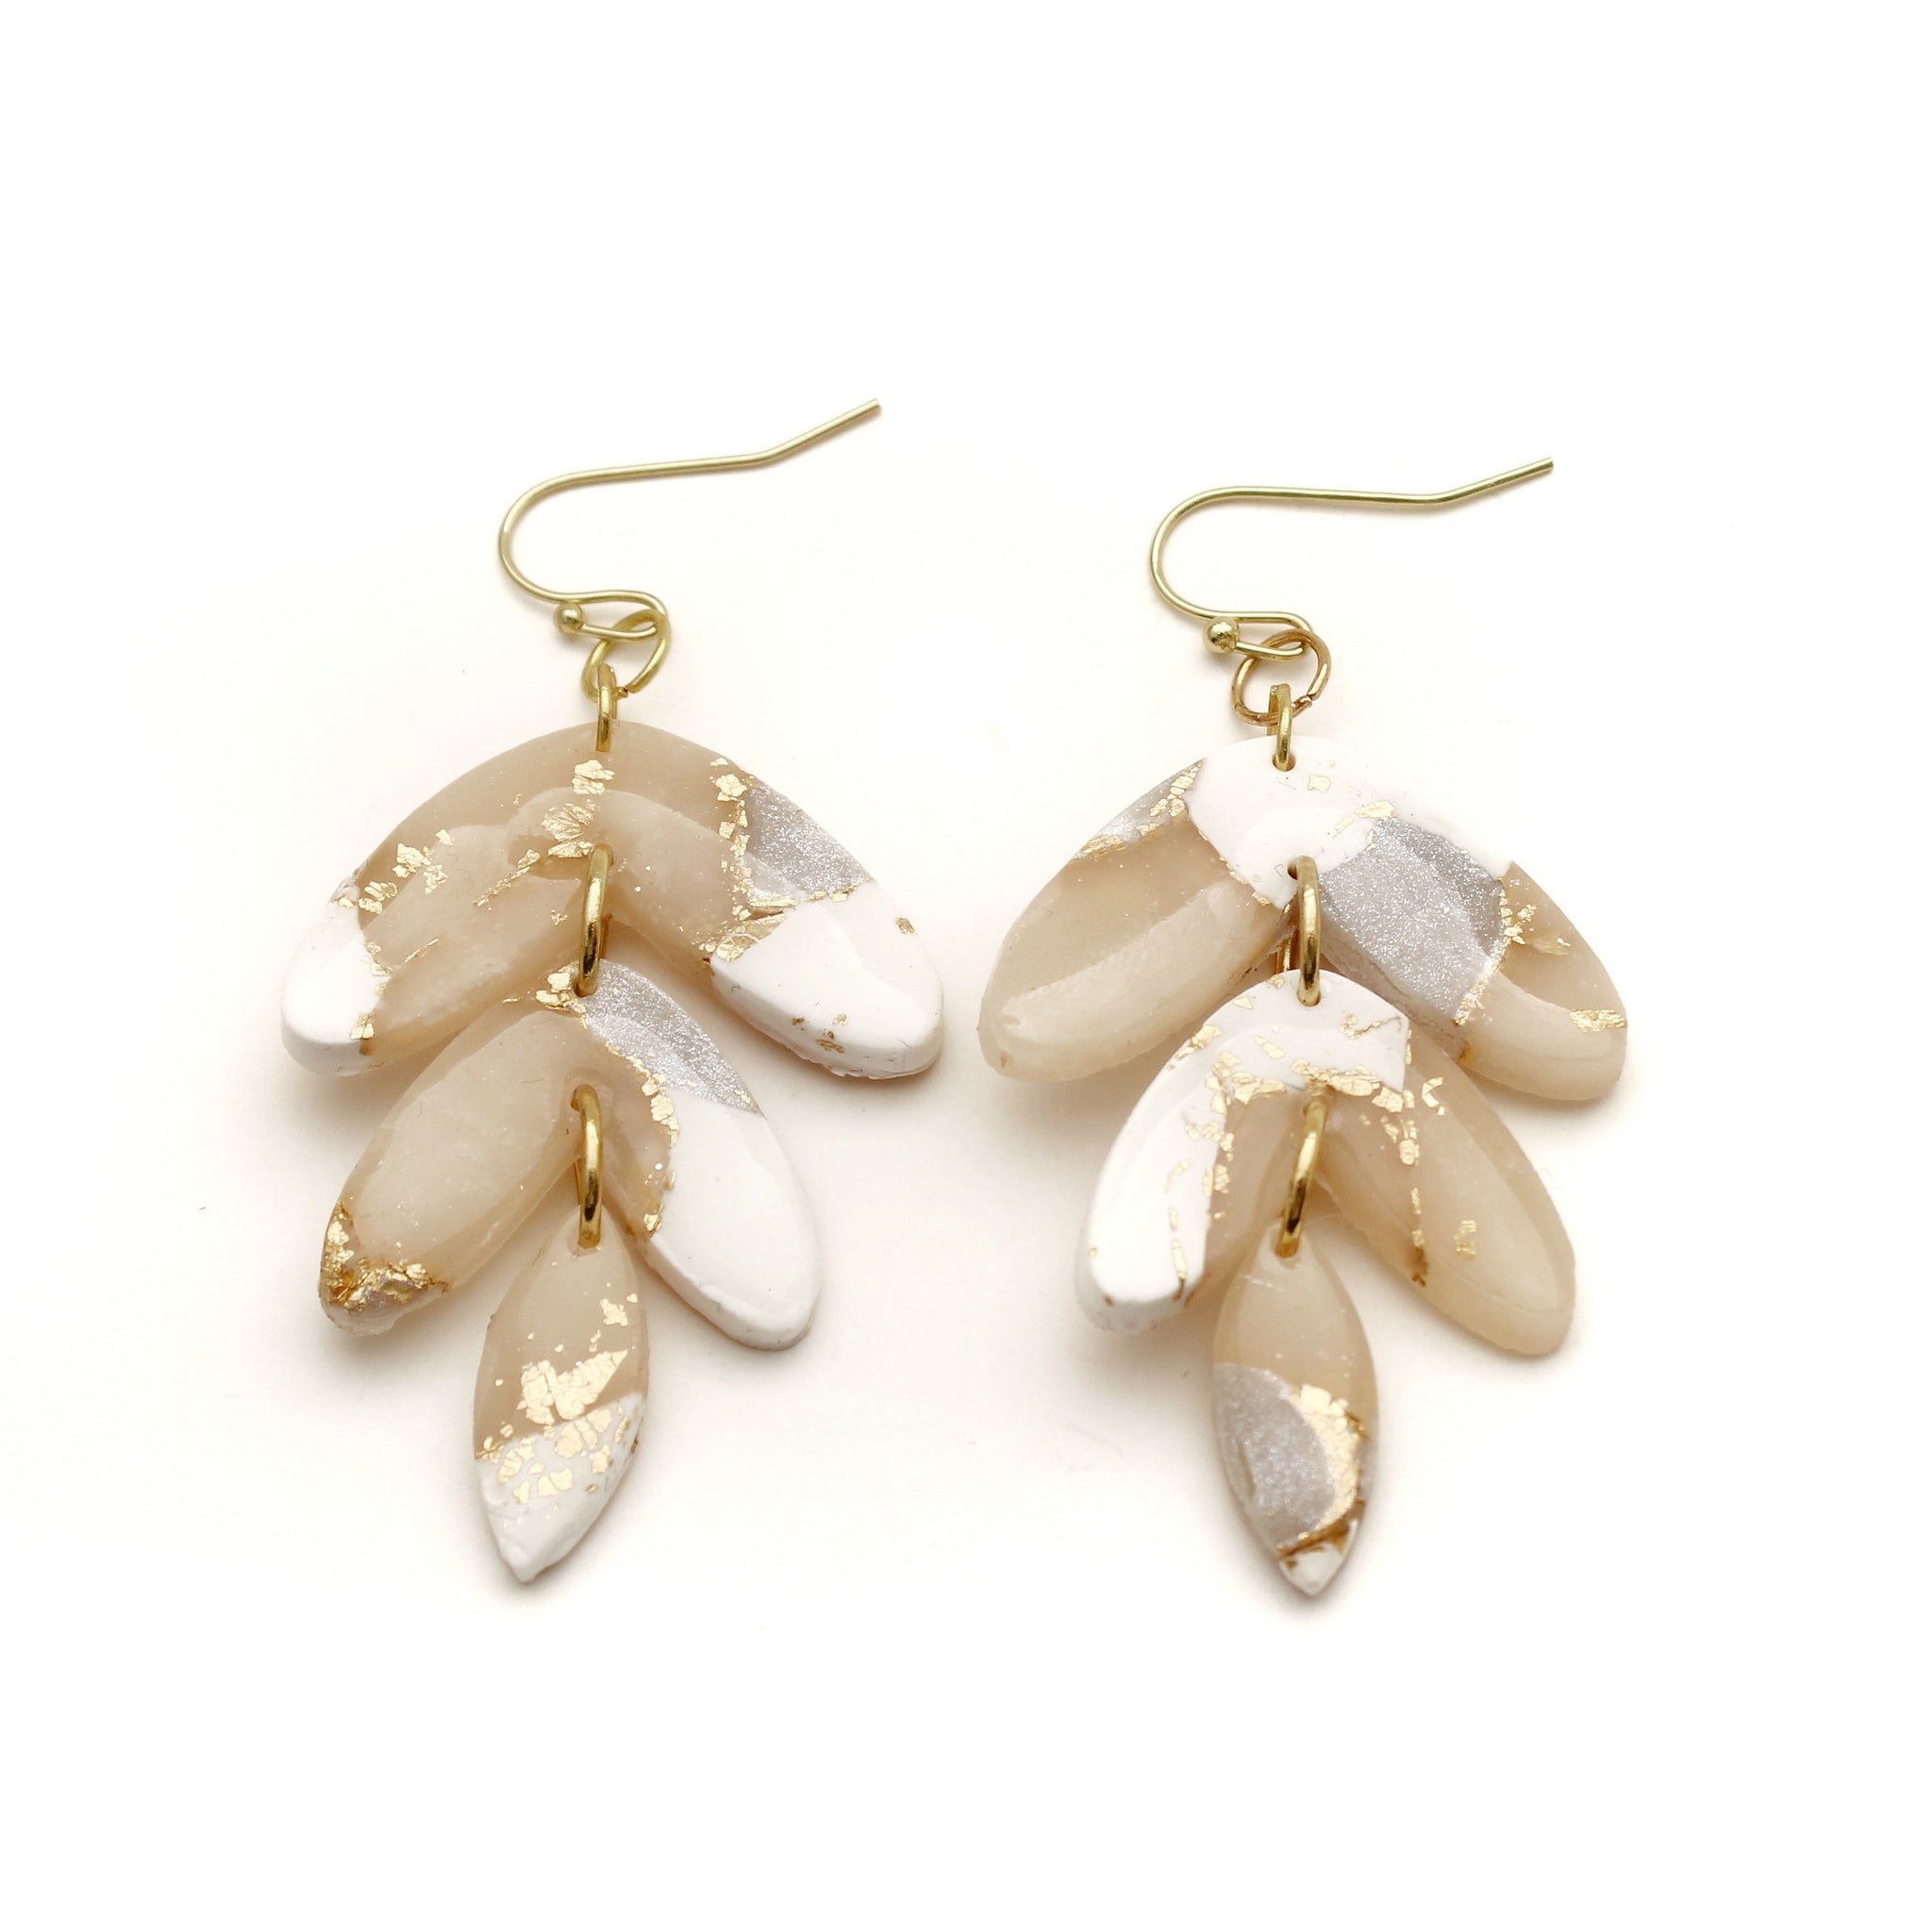 White and Nude Leaf Dangle Earrings - Valentine's